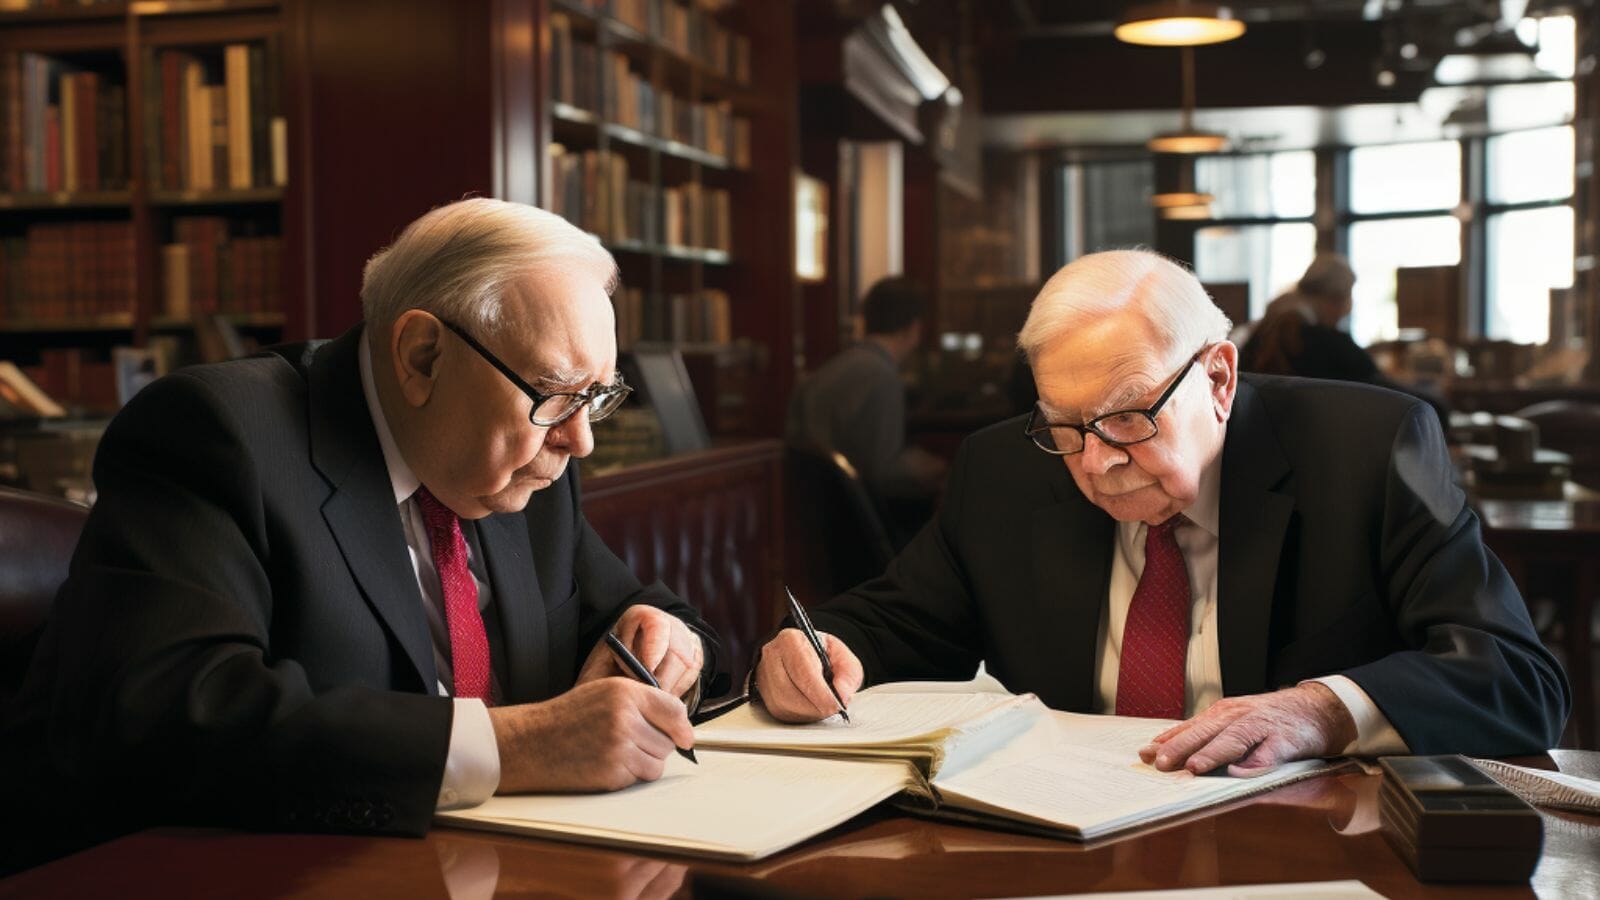 Warren Buffett and Charlie Munger sitting at a table writing on papers

